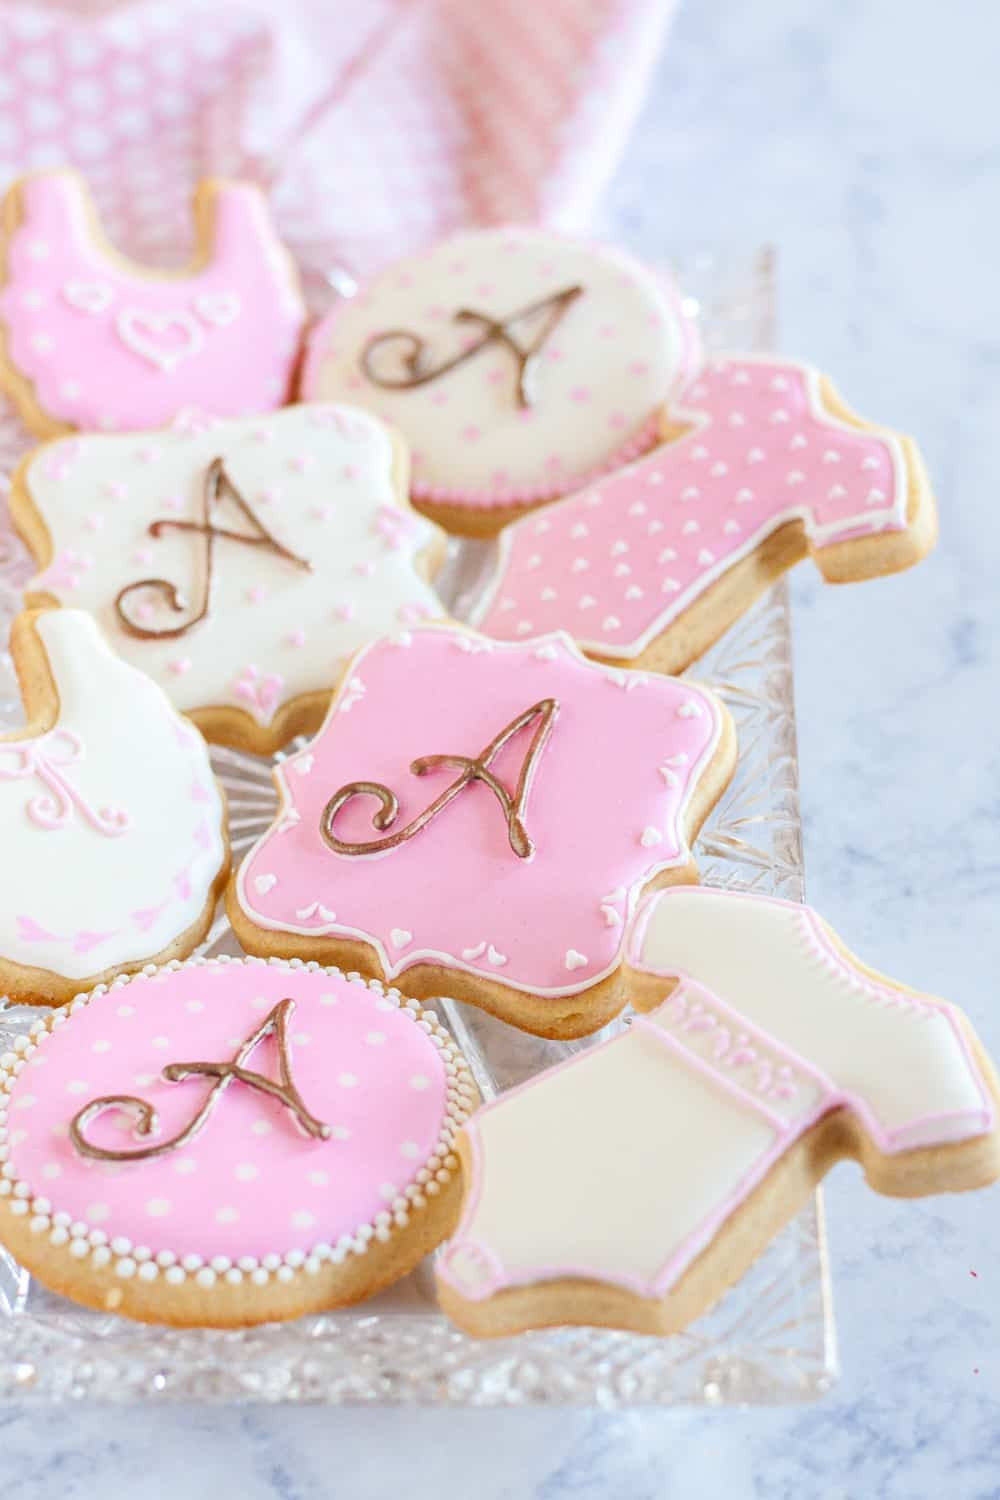 Baby Shower Cookie Recipes
 How to Make Monogrammed Sugar Cookies Without A Projector